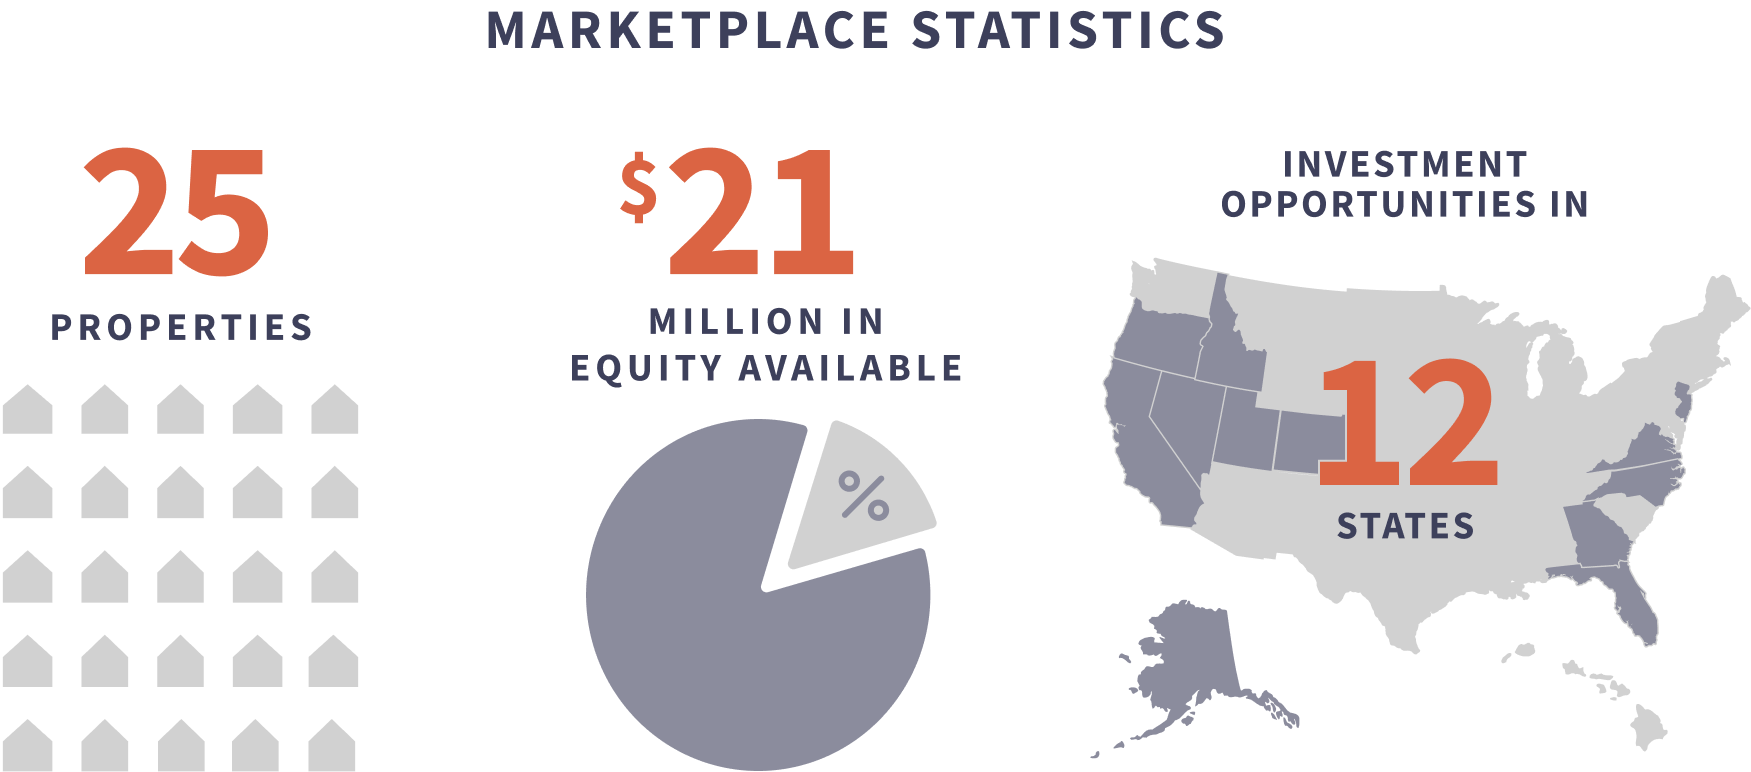 Marketplace Statistics graphic highlighting Vesta Equity's total home equity investment opportunities